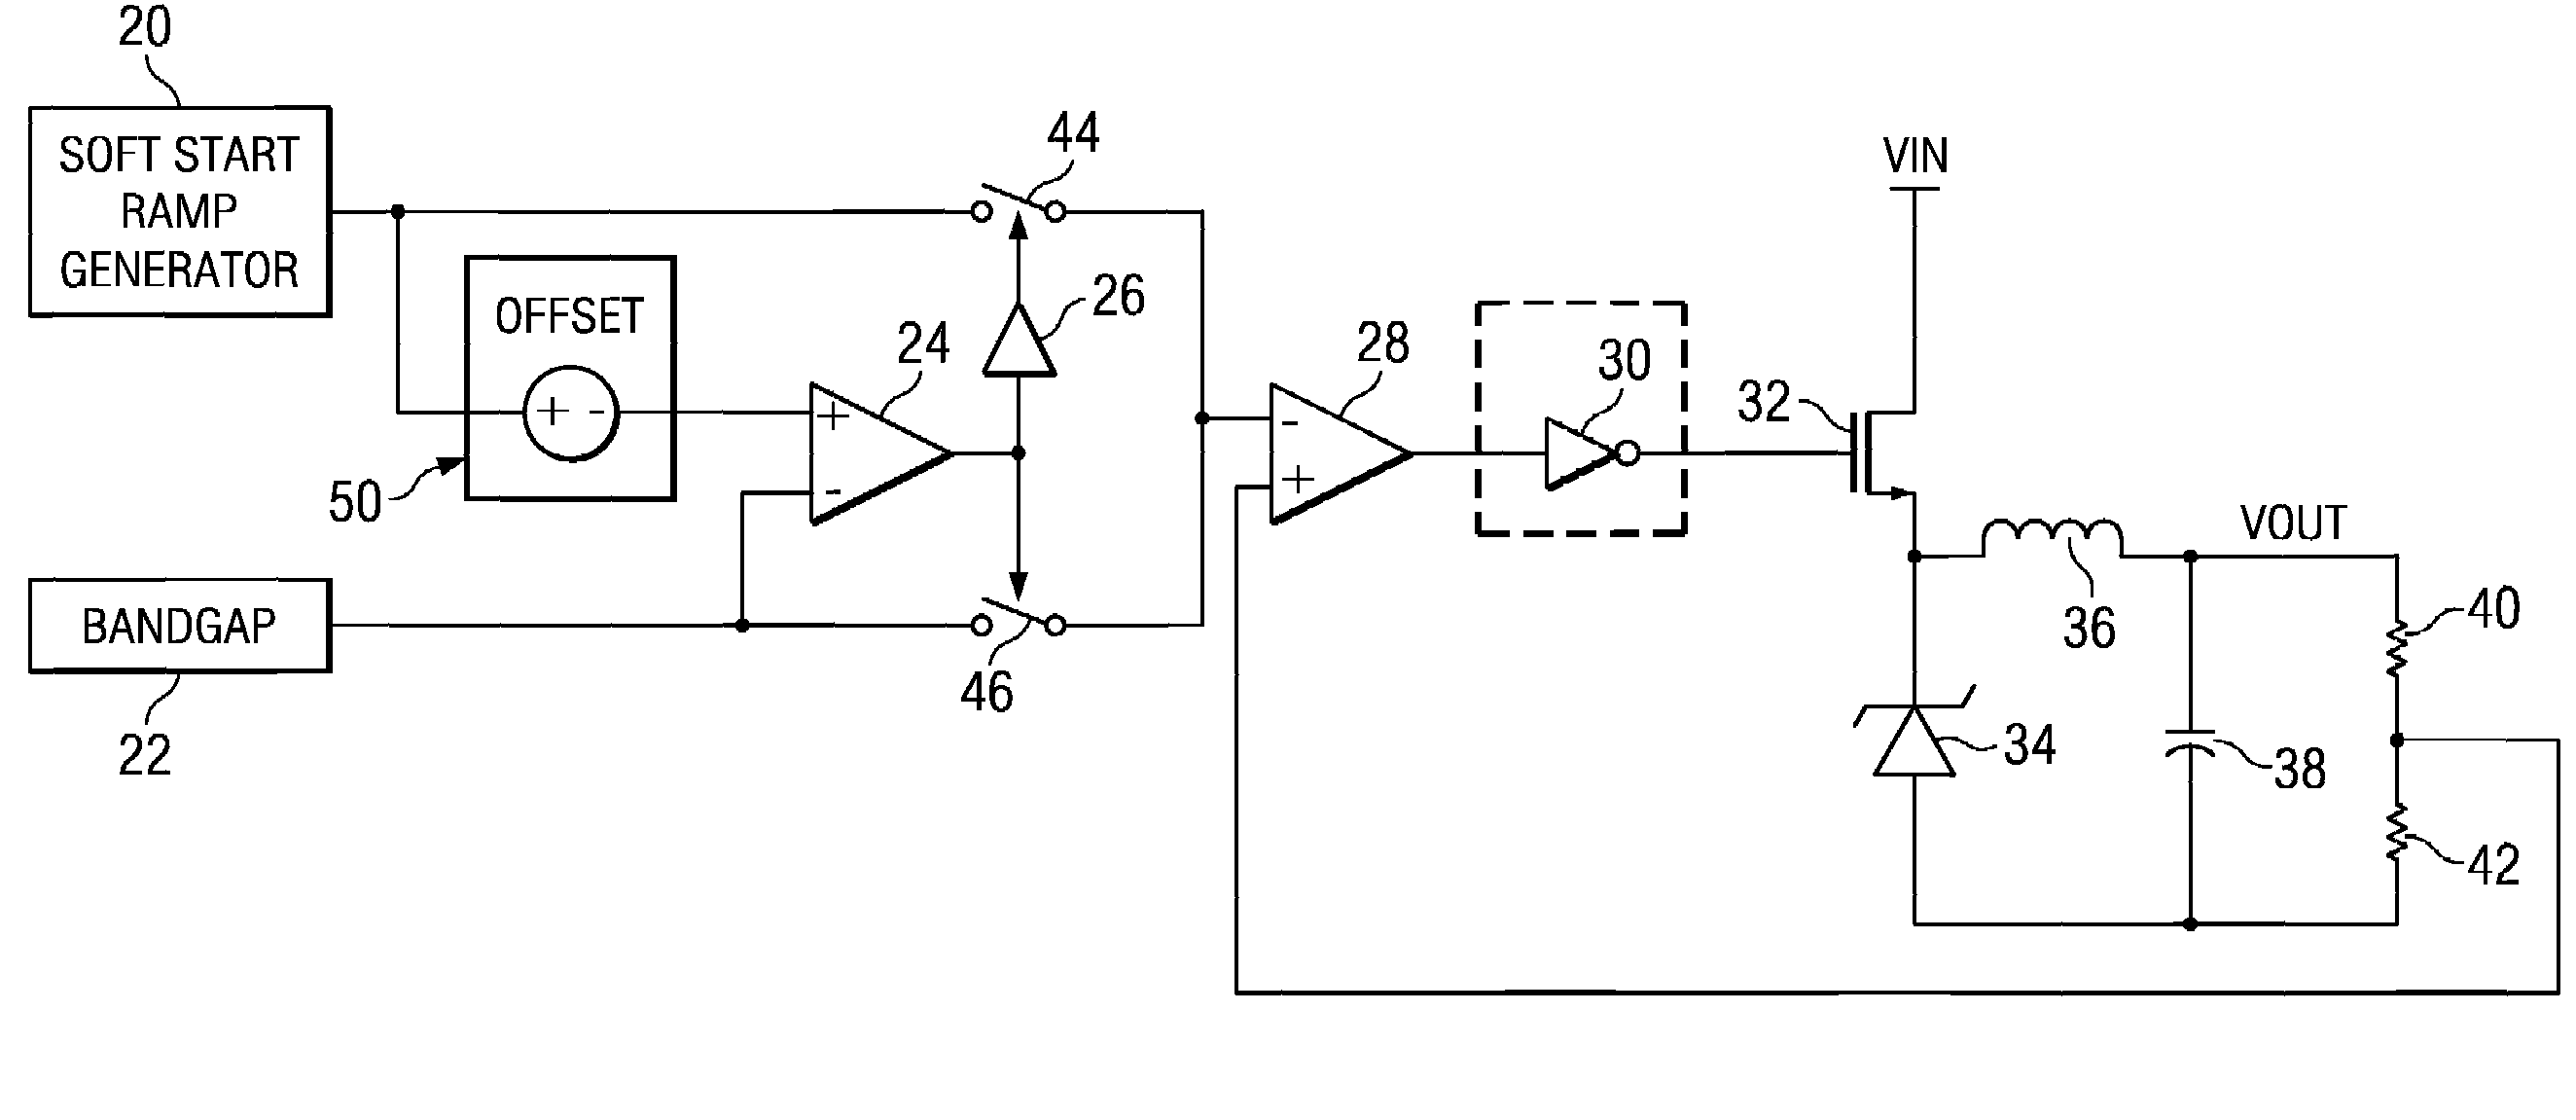 Reference voltage generator for reduced voltage overshoot in a switch mode regulator at the end of soft-start